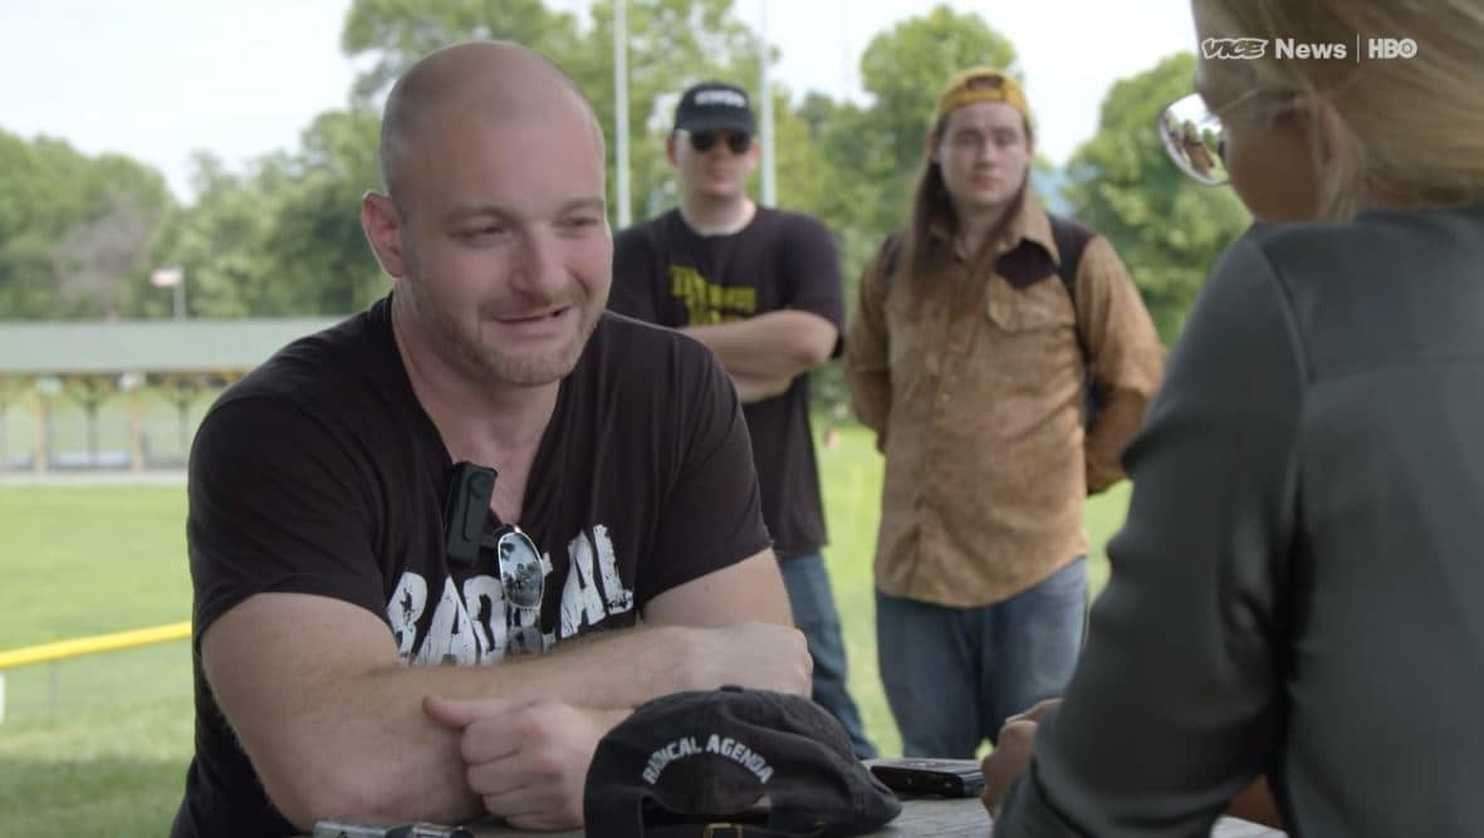 image for OkCupid kicks out white supremacist Chris Cantwell: ‘There is no room for hate’